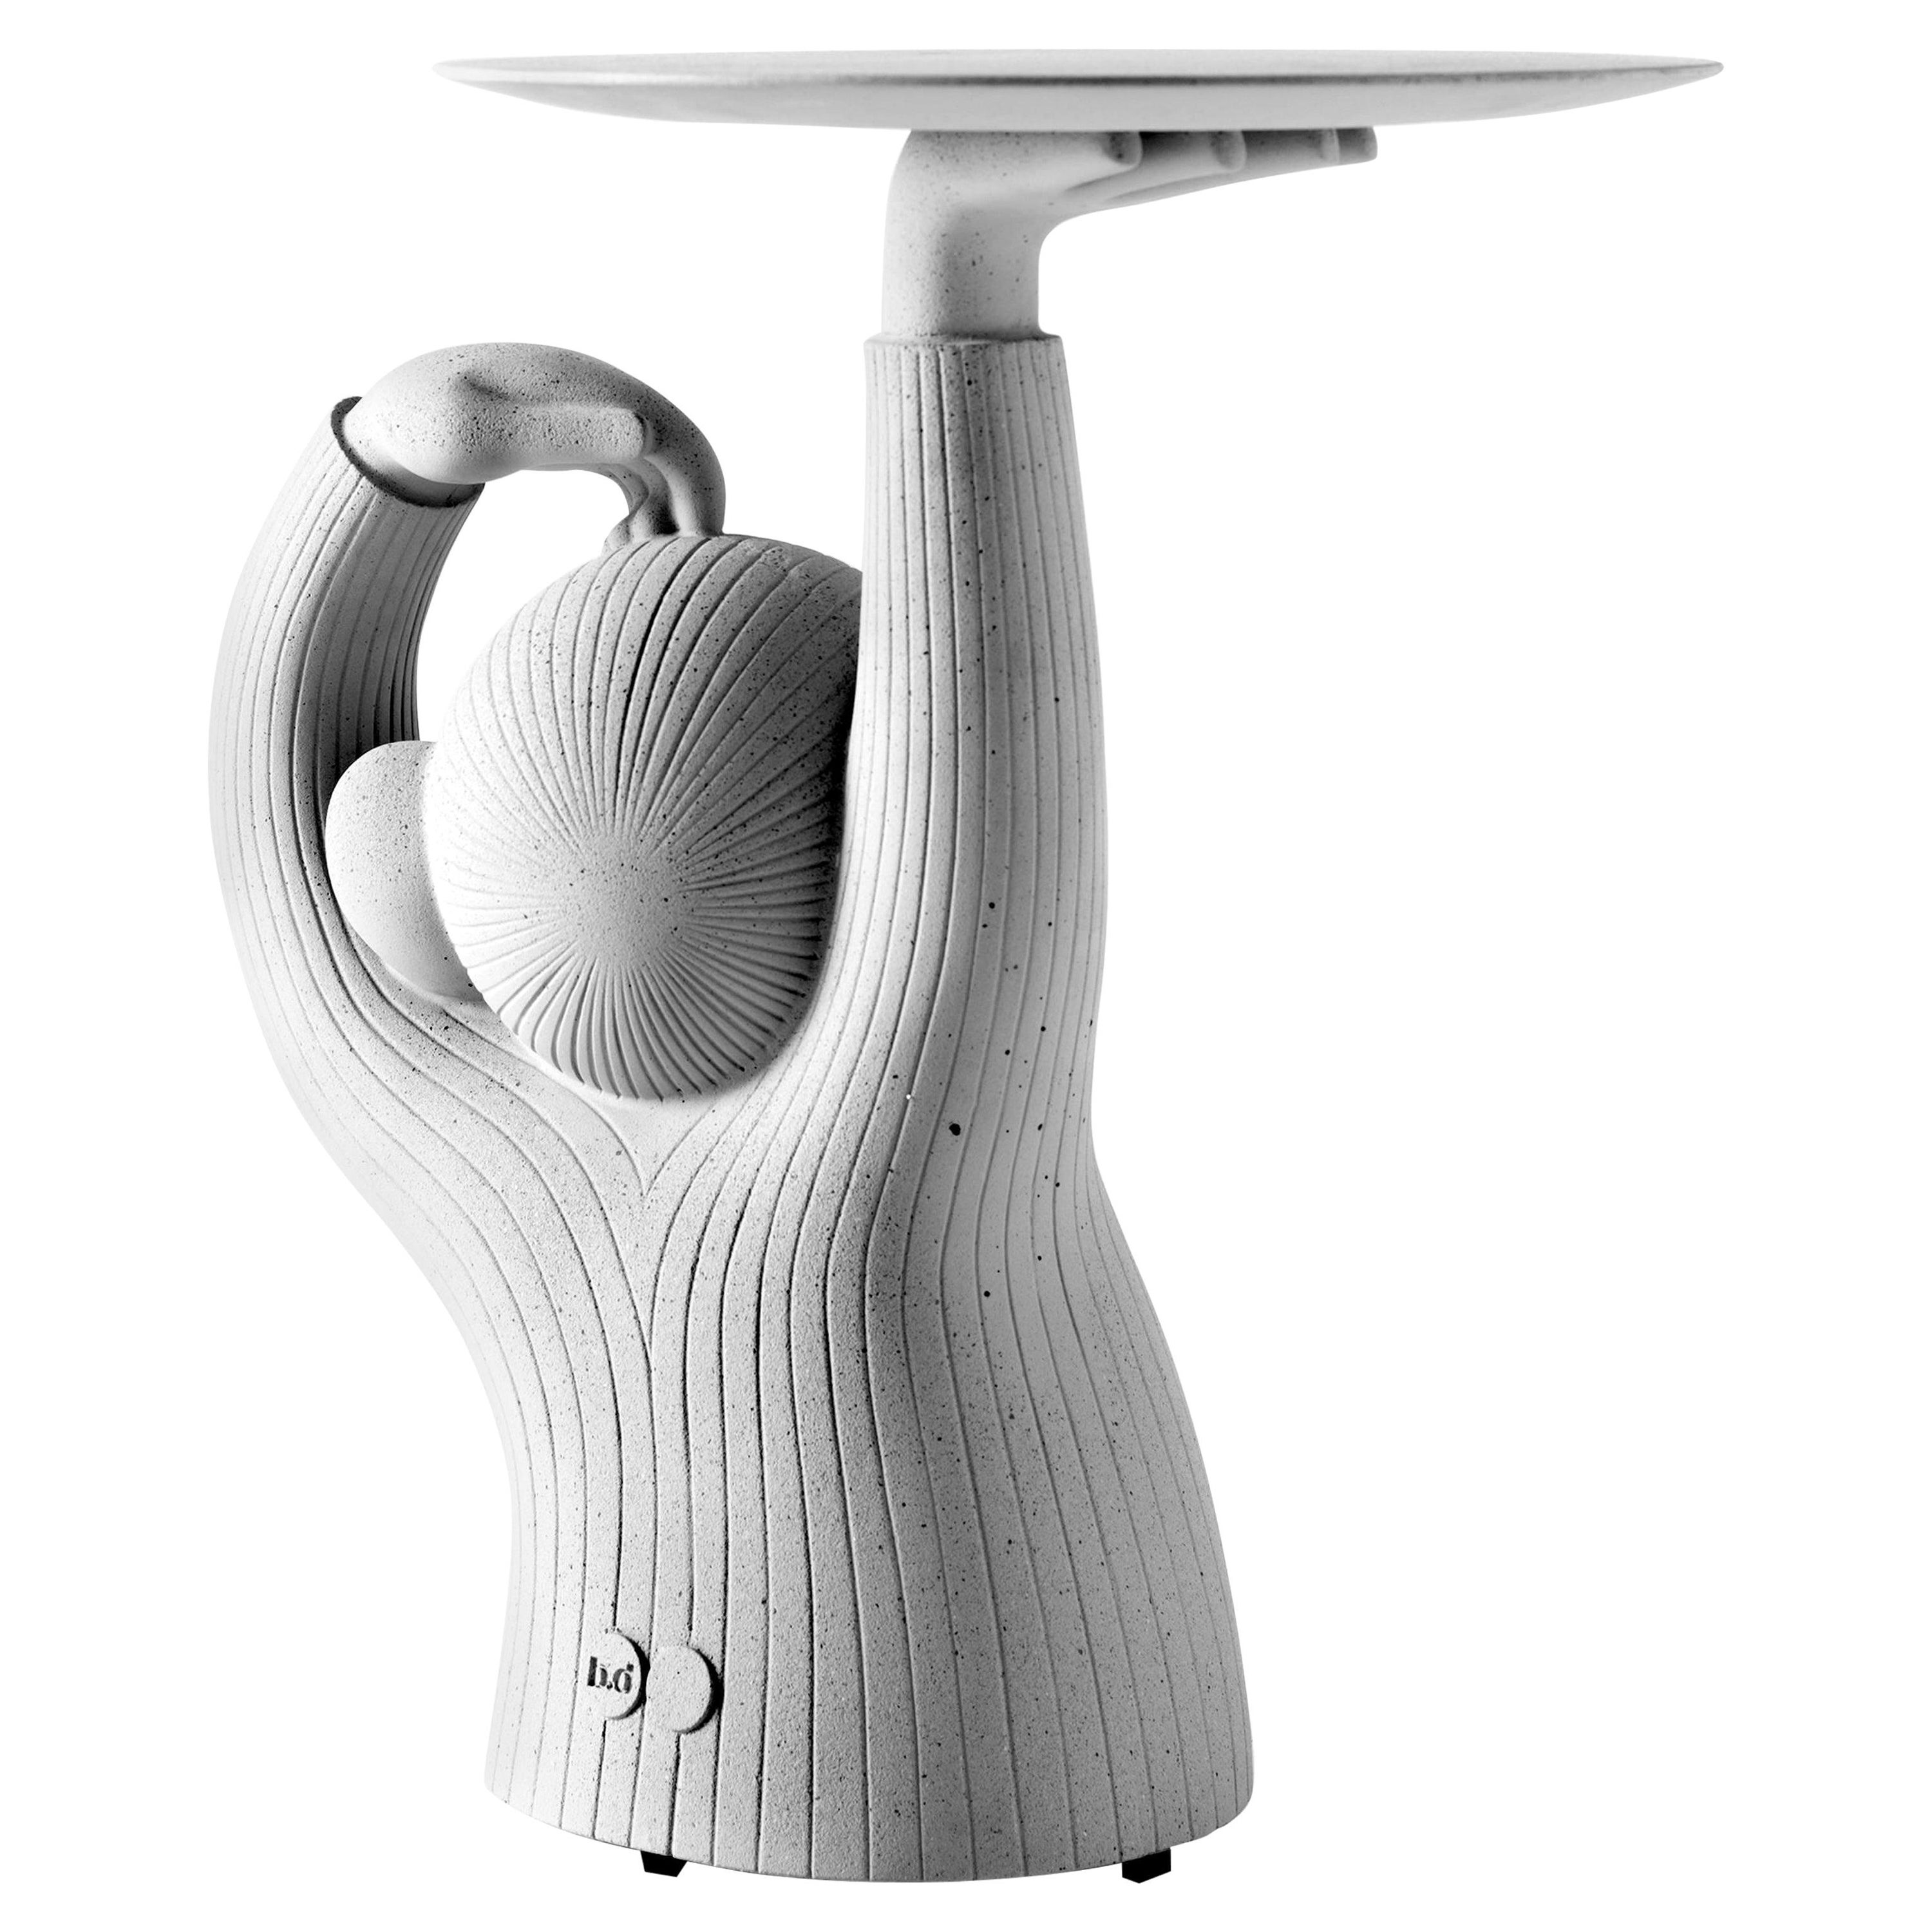 Monkey side table. Design by Jaime Hayon, 2016
Manufactured by BD Barcelona

Side table in one solid architectural concrete in grey. 
Includes regulatory glides.